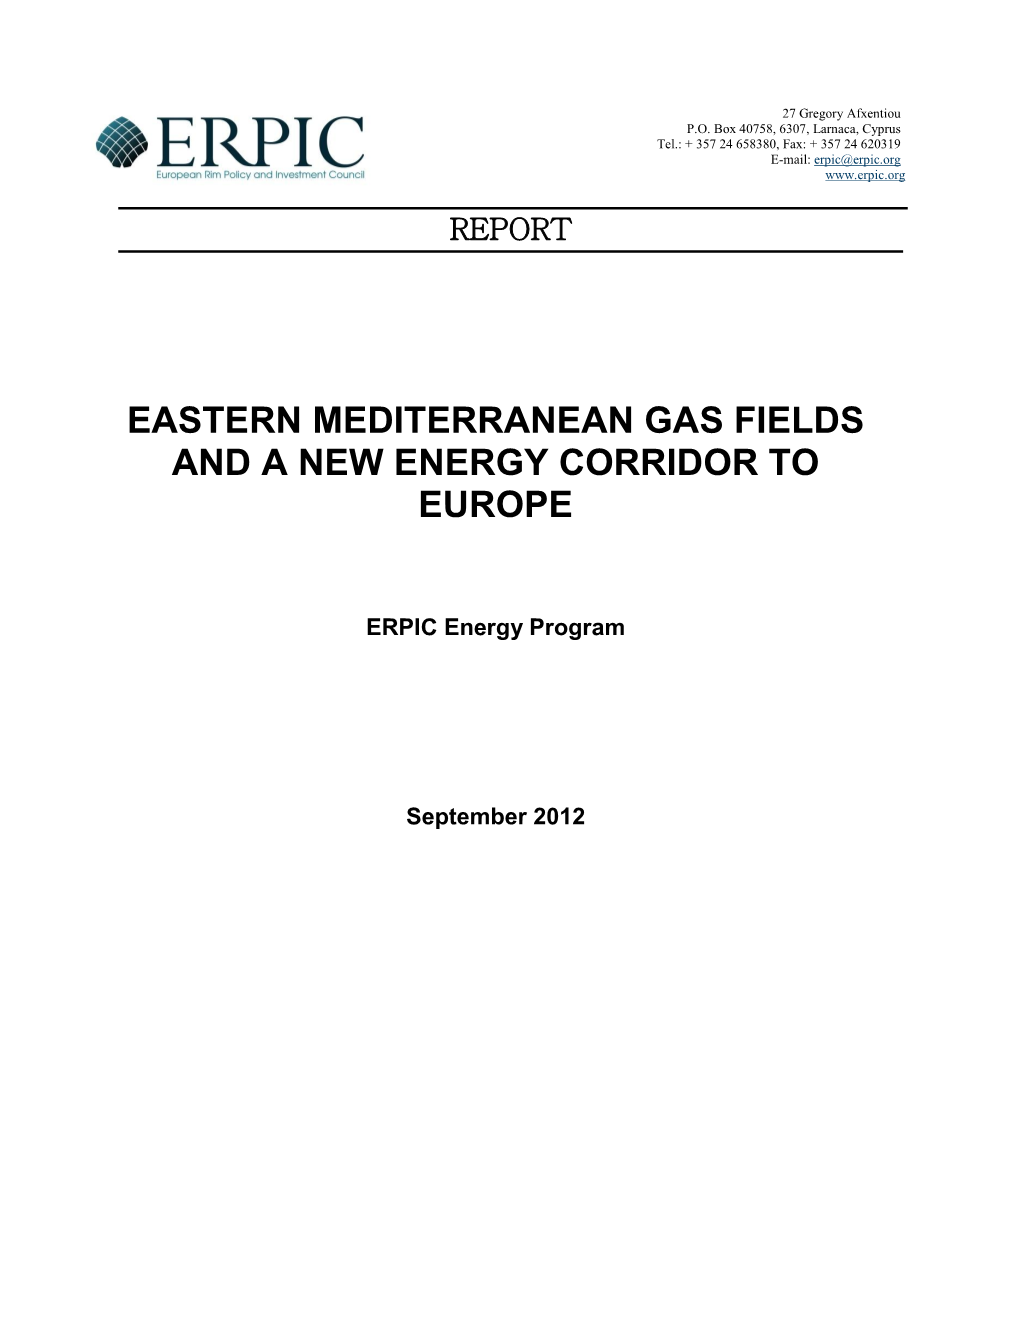 Eastern Mediterranean Gas Fields and a New Energy Corridor to Europe